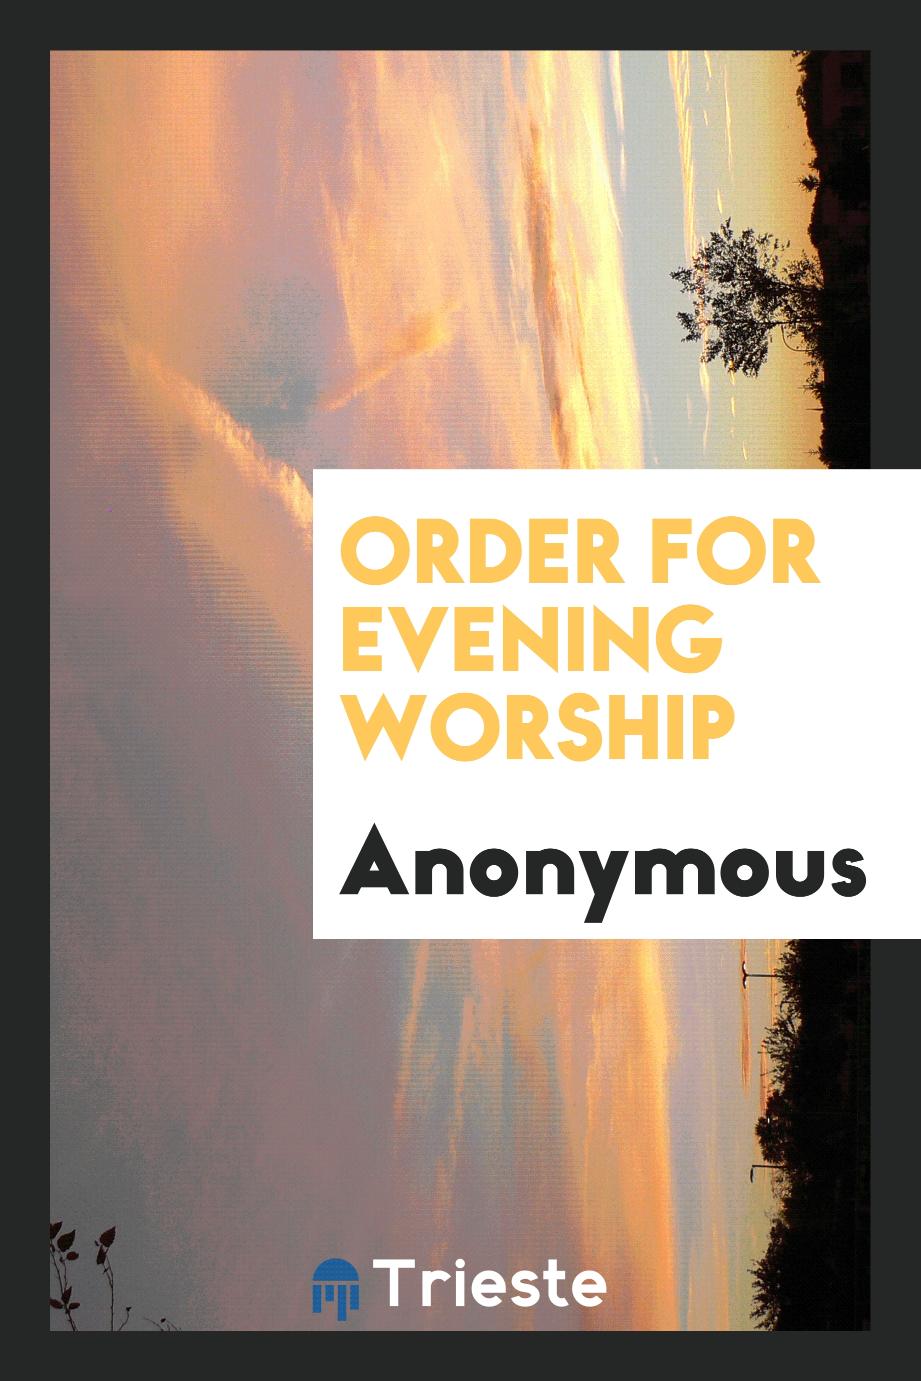 Order for evening worship